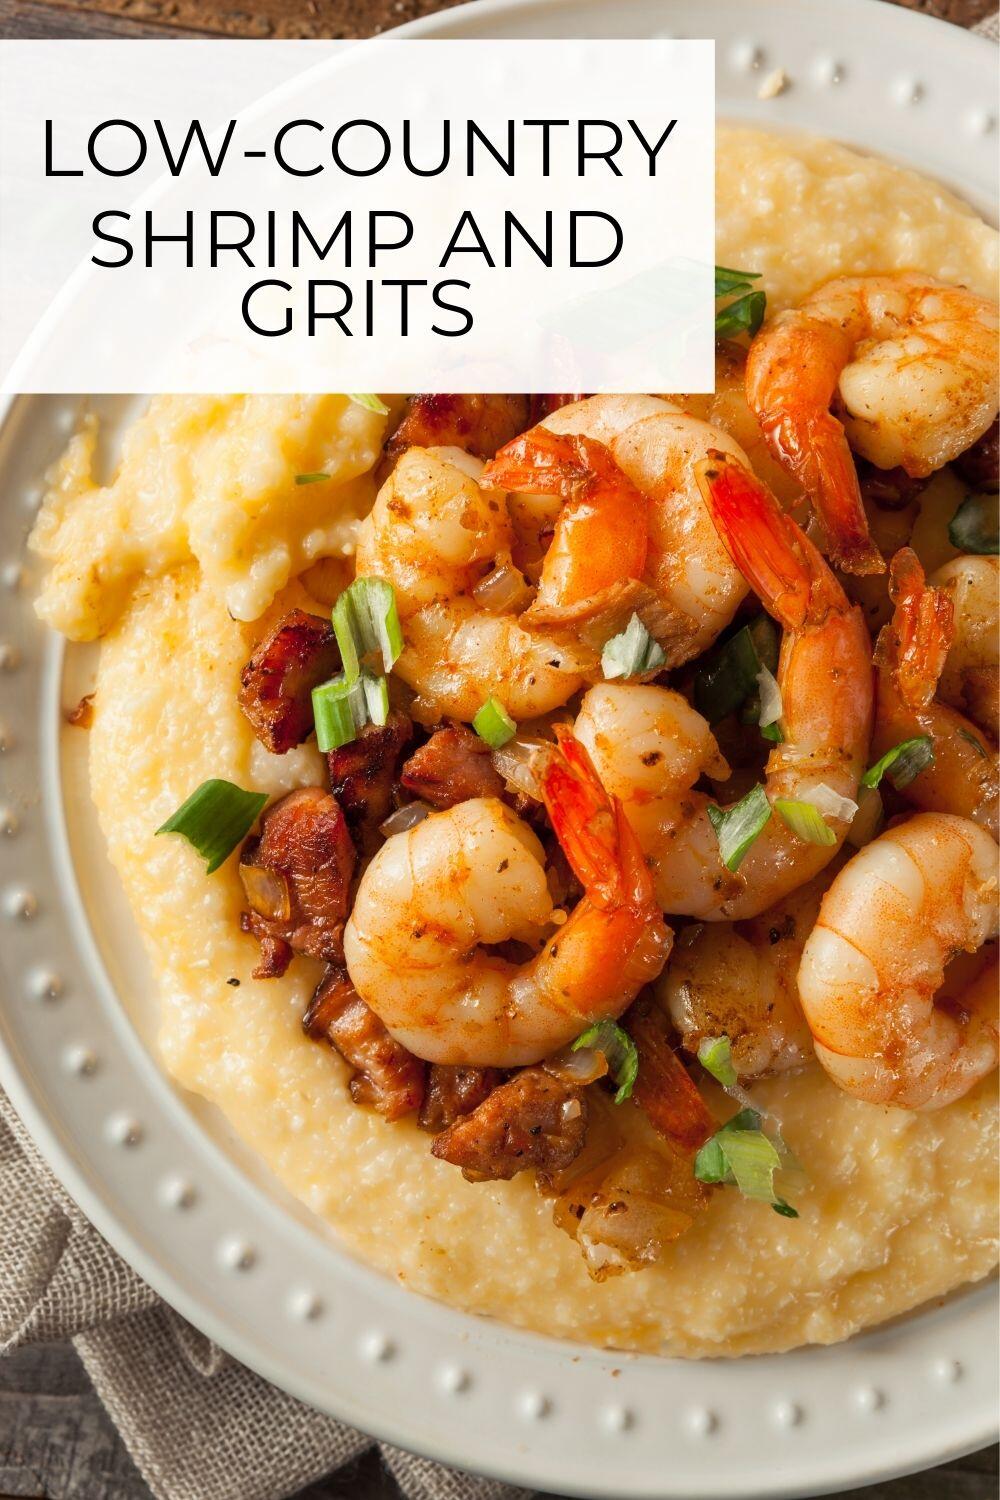 Shrimp and Grits Recipe: an iconic Southern dish · Nourish and Nestle